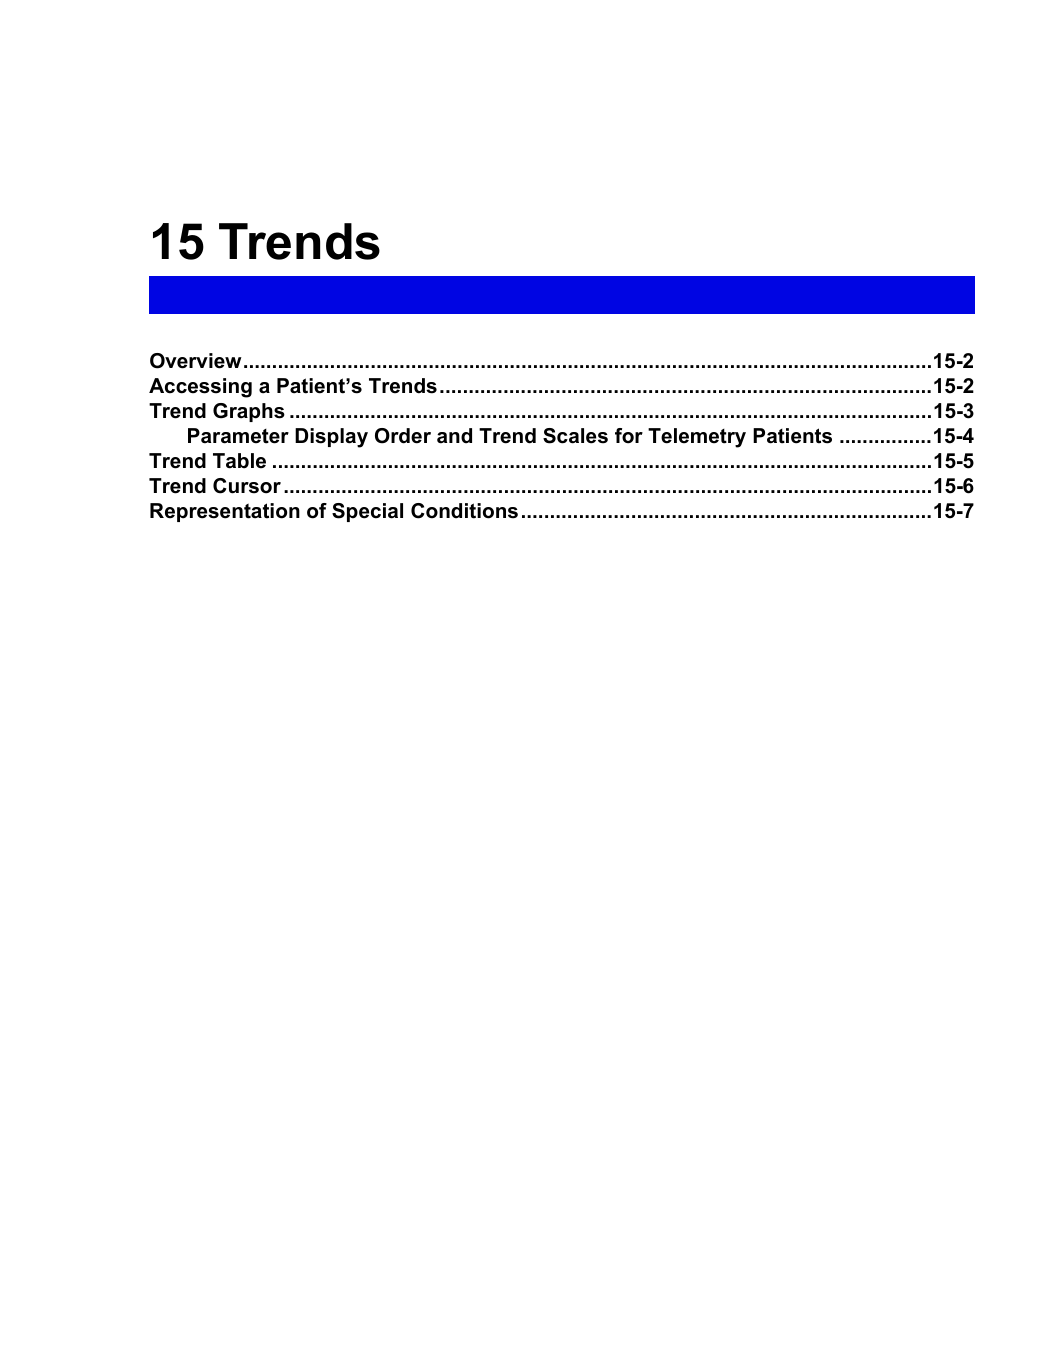 15 TrendsOverview.......................................................................................................................15-2Accessing a Patient’s Trends.....................................................................................15-2Trend Graphs ...............................................................................................................15-3Parameter Display Order and Trend Scales for Telemetry Patients ................15-4Trend Table ..................................................................................................................15-5Trend Cursor ................................................................................................................15-6Representation of Special Conditions.......................................................................15-7